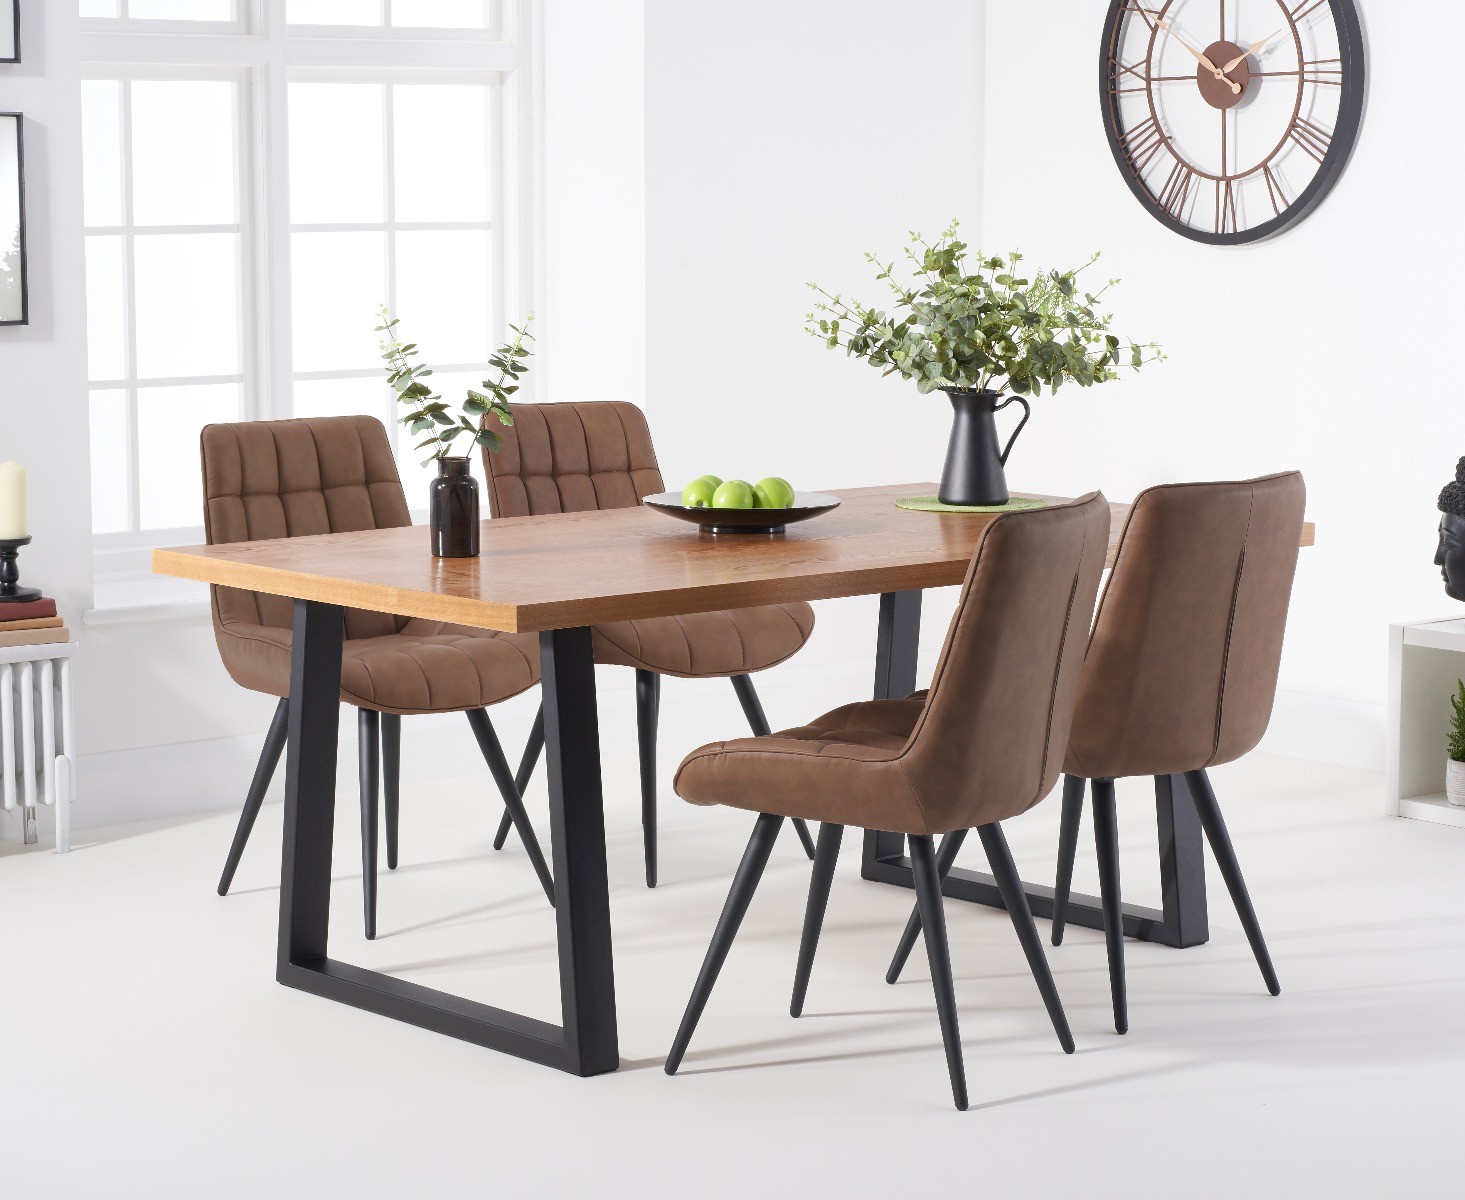 Urban 180cm Industrial Dining Table With 6 Brown Larson Chairs